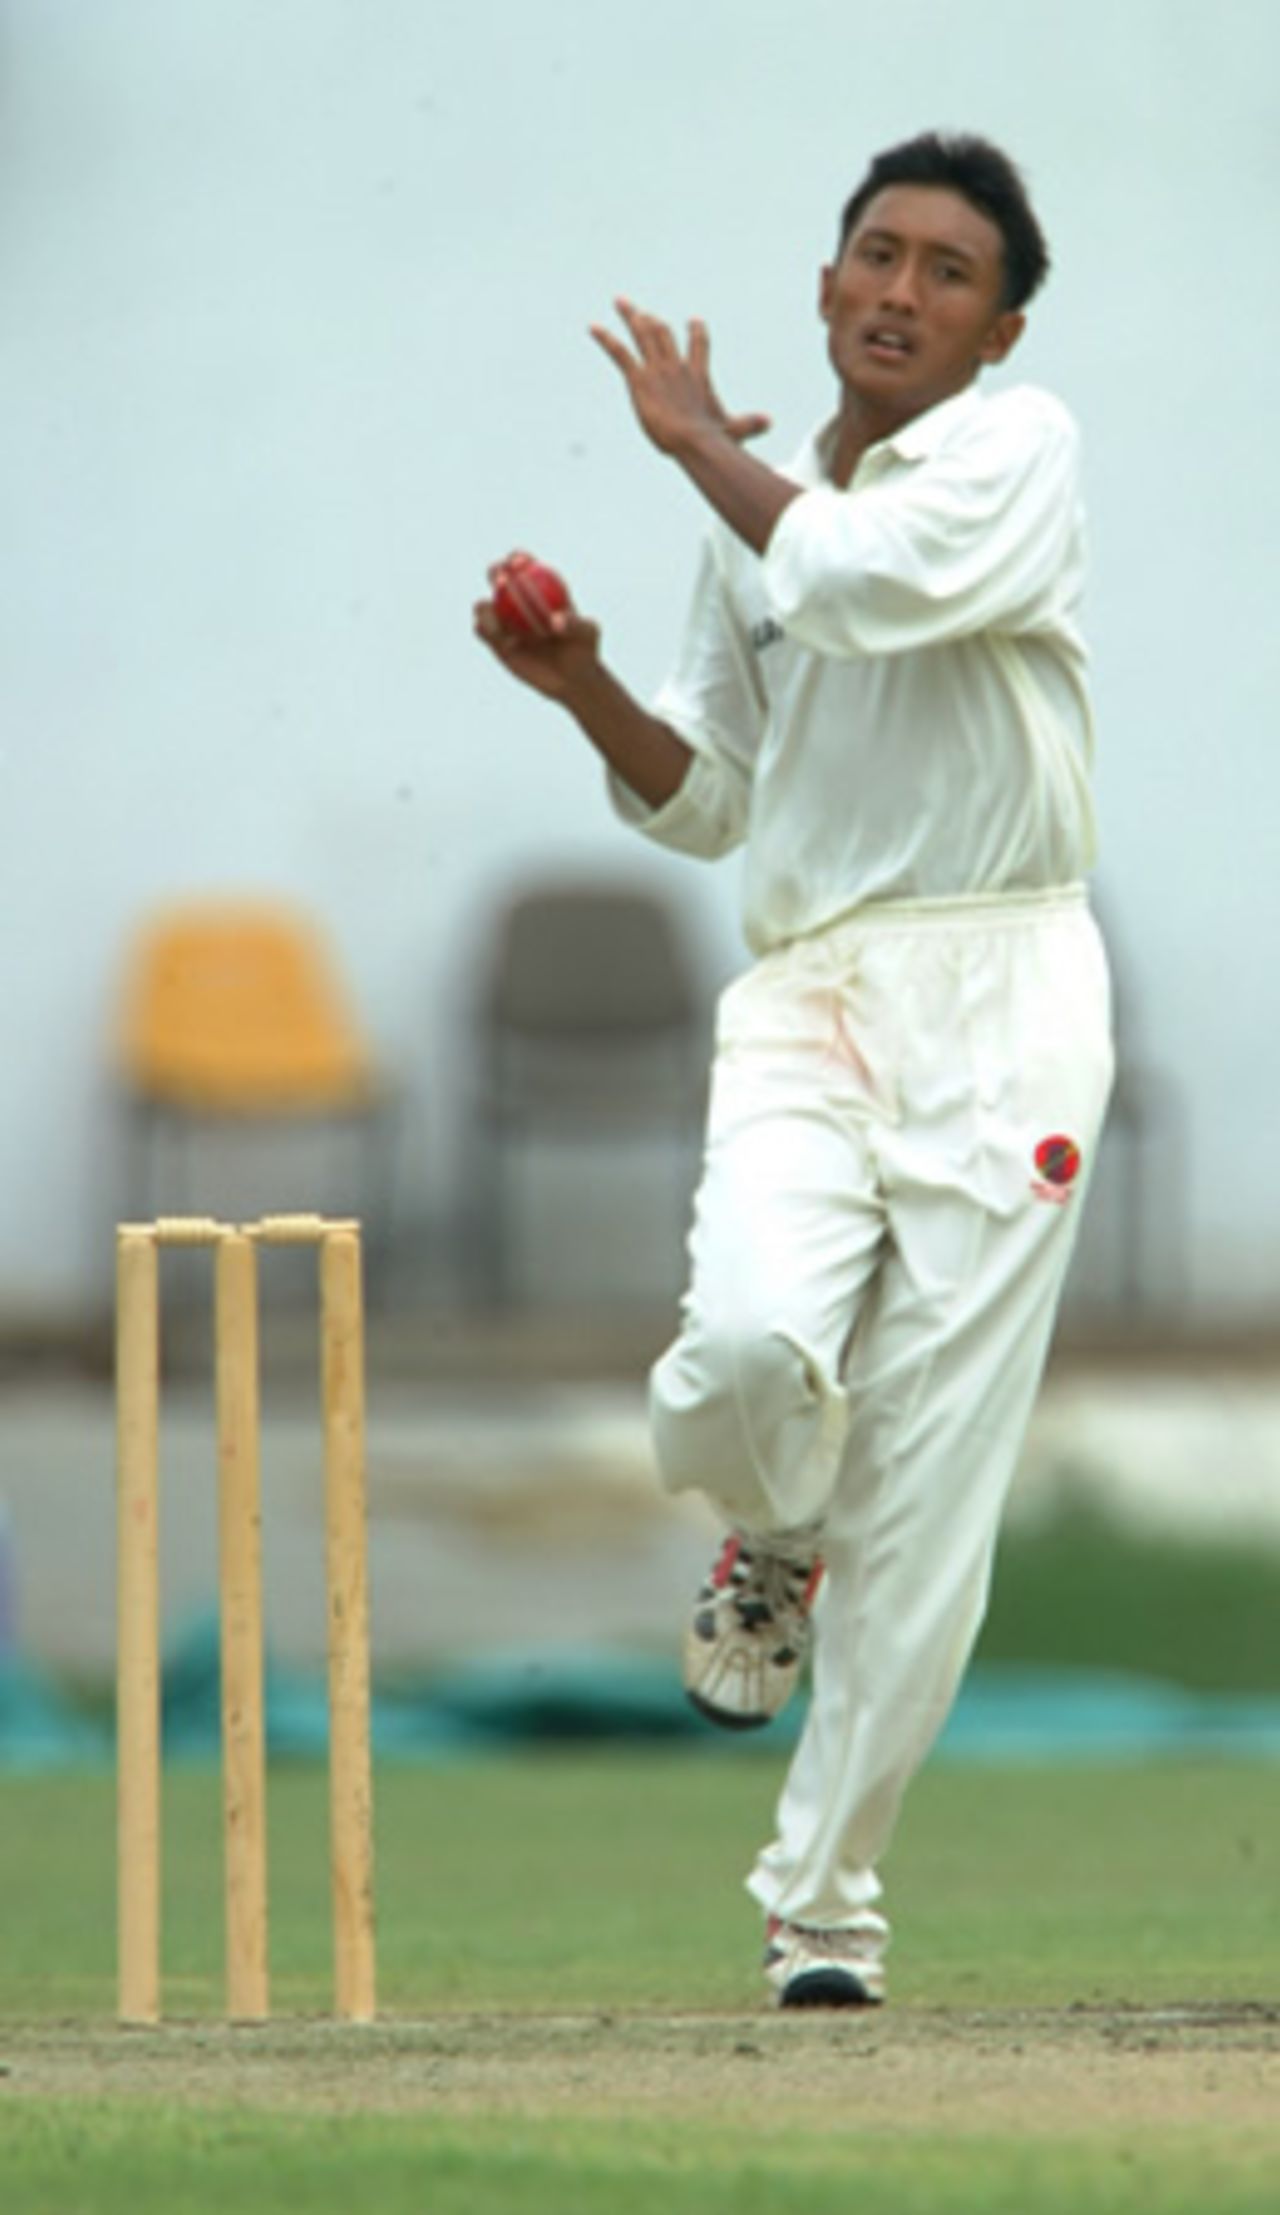 Mohammad Shukri of Malaysia during his 2-wicket spell, Malaysia Under-19s v Thailand Under-19s at National Stadium Karachi, Youth Asia Cup 2003, 23 July 2003.